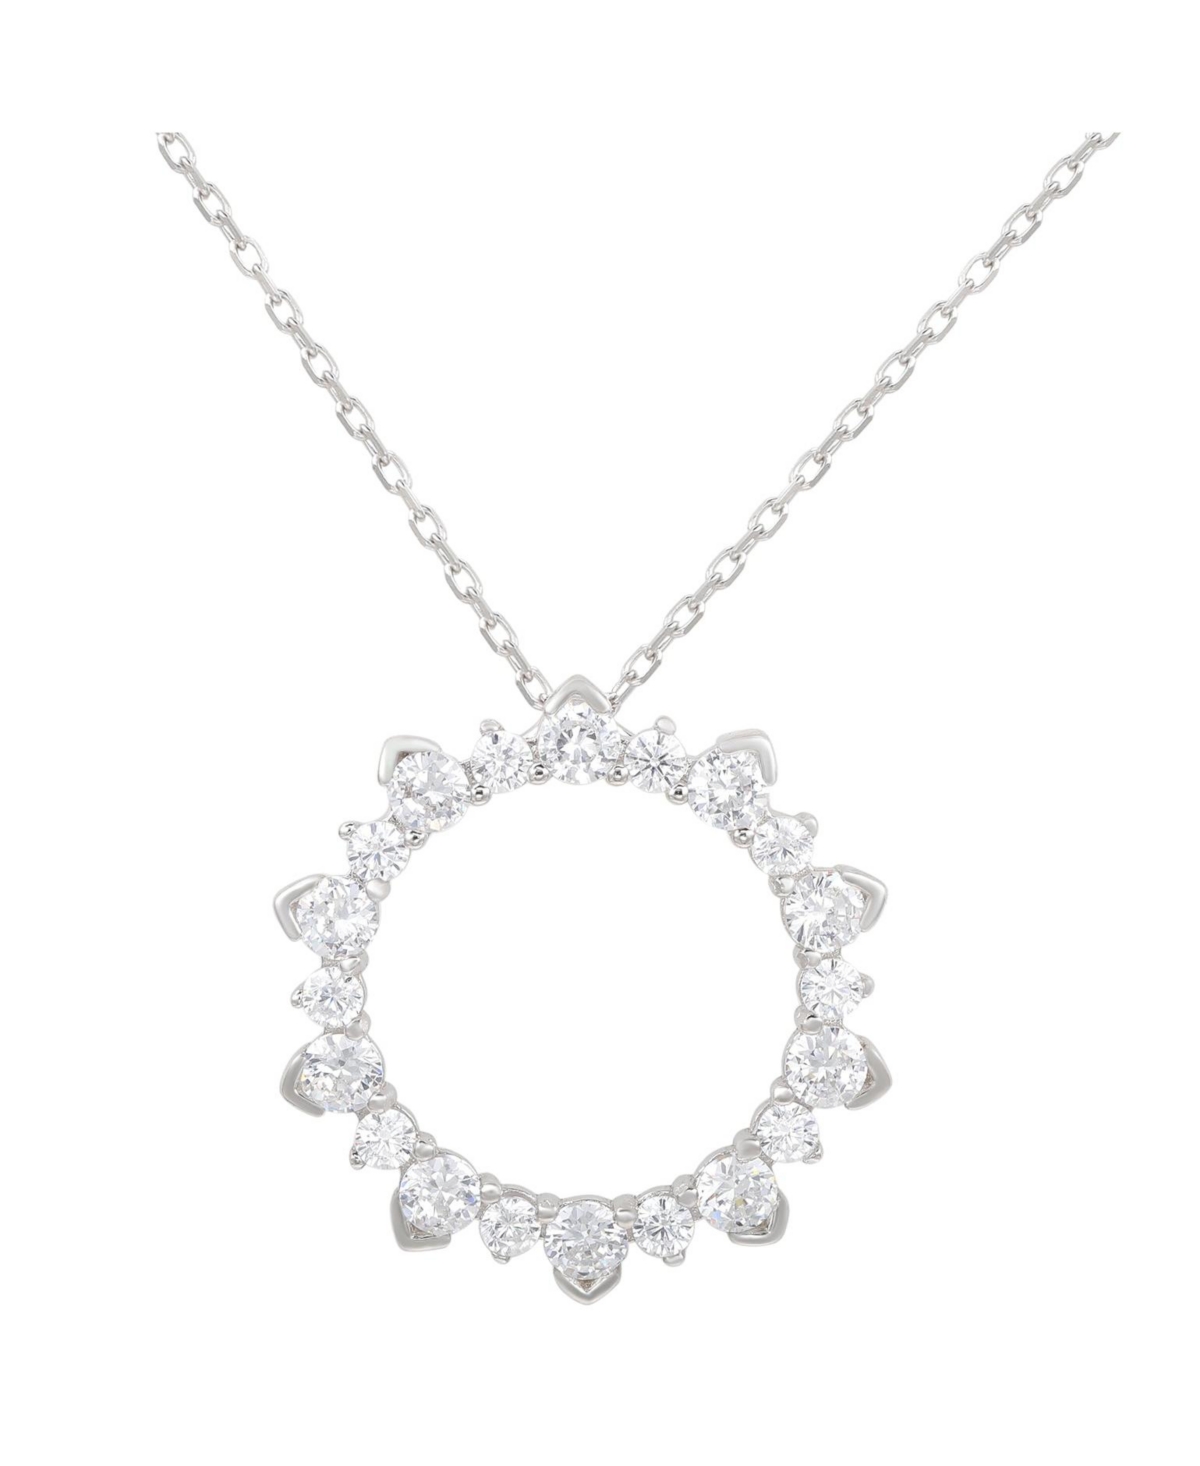 Suzy Levian Sterling Silver Cubic Zirconia Starburst Open Circle Pendant Necklace - White